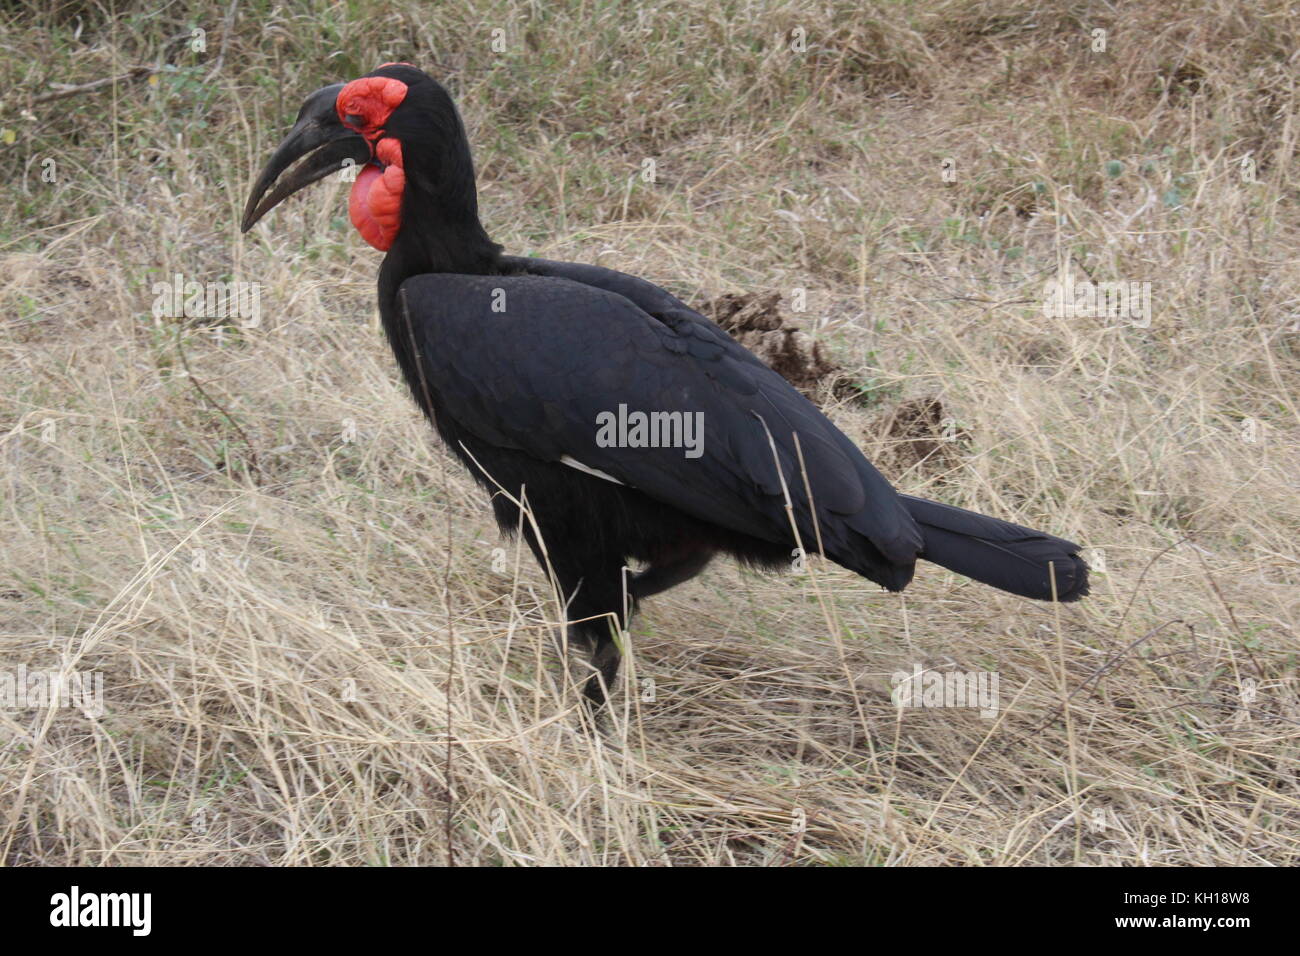 Southern Ground Hornbill Kruger NP Stock Photo